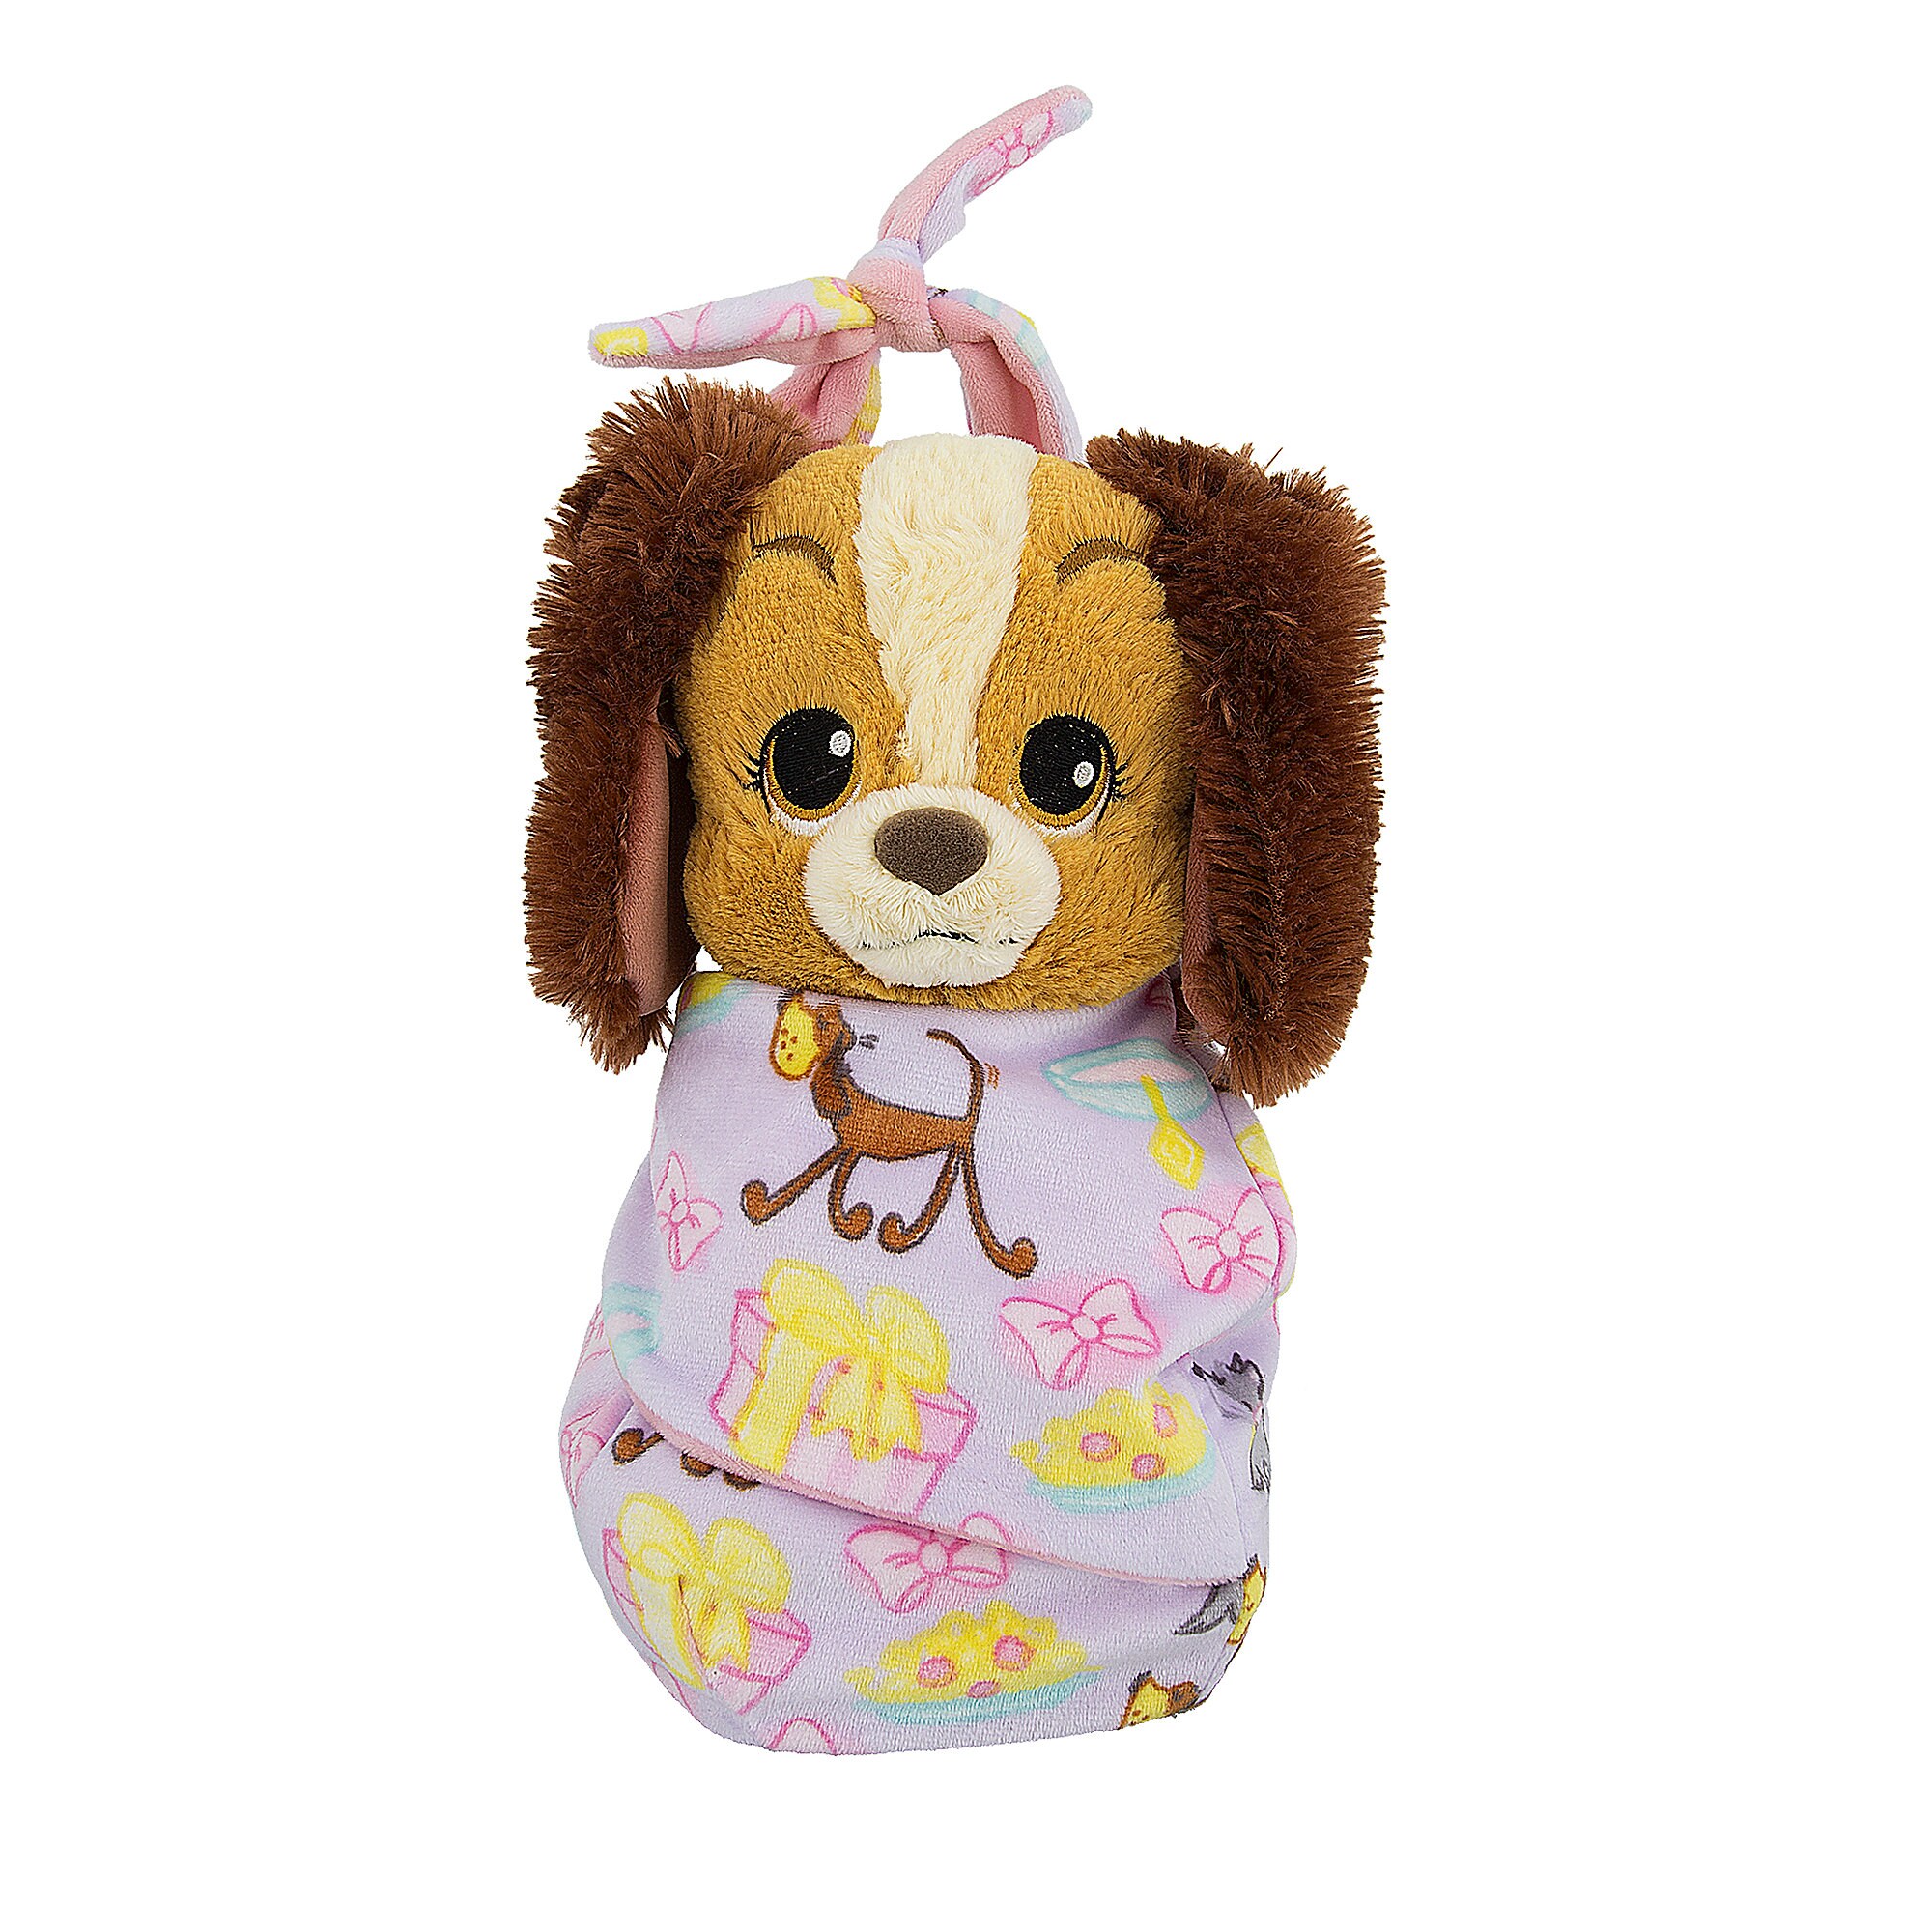 Lady Plush with Blanket Pouch - Disney's Babies - Small